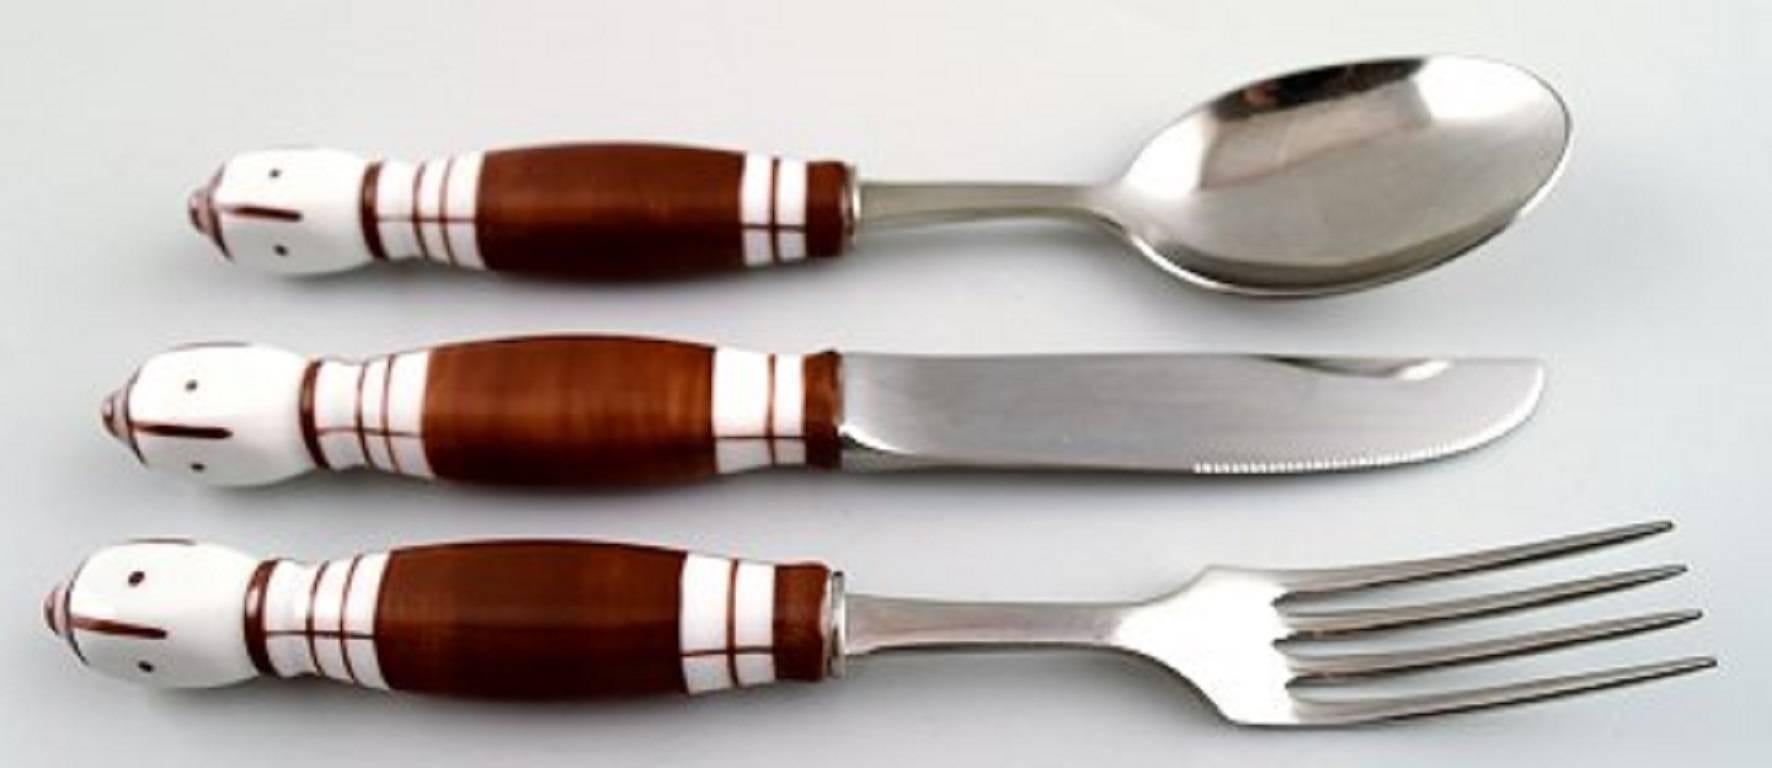 Rosenthal Siena complete barbecue 6p. cutlery incl. sharpening steel, serving spoon and carving fork.

Designed by Bjorn Wiinblad, 1970s.

Sharpening steel measures 32 cm.

In perfect condition.